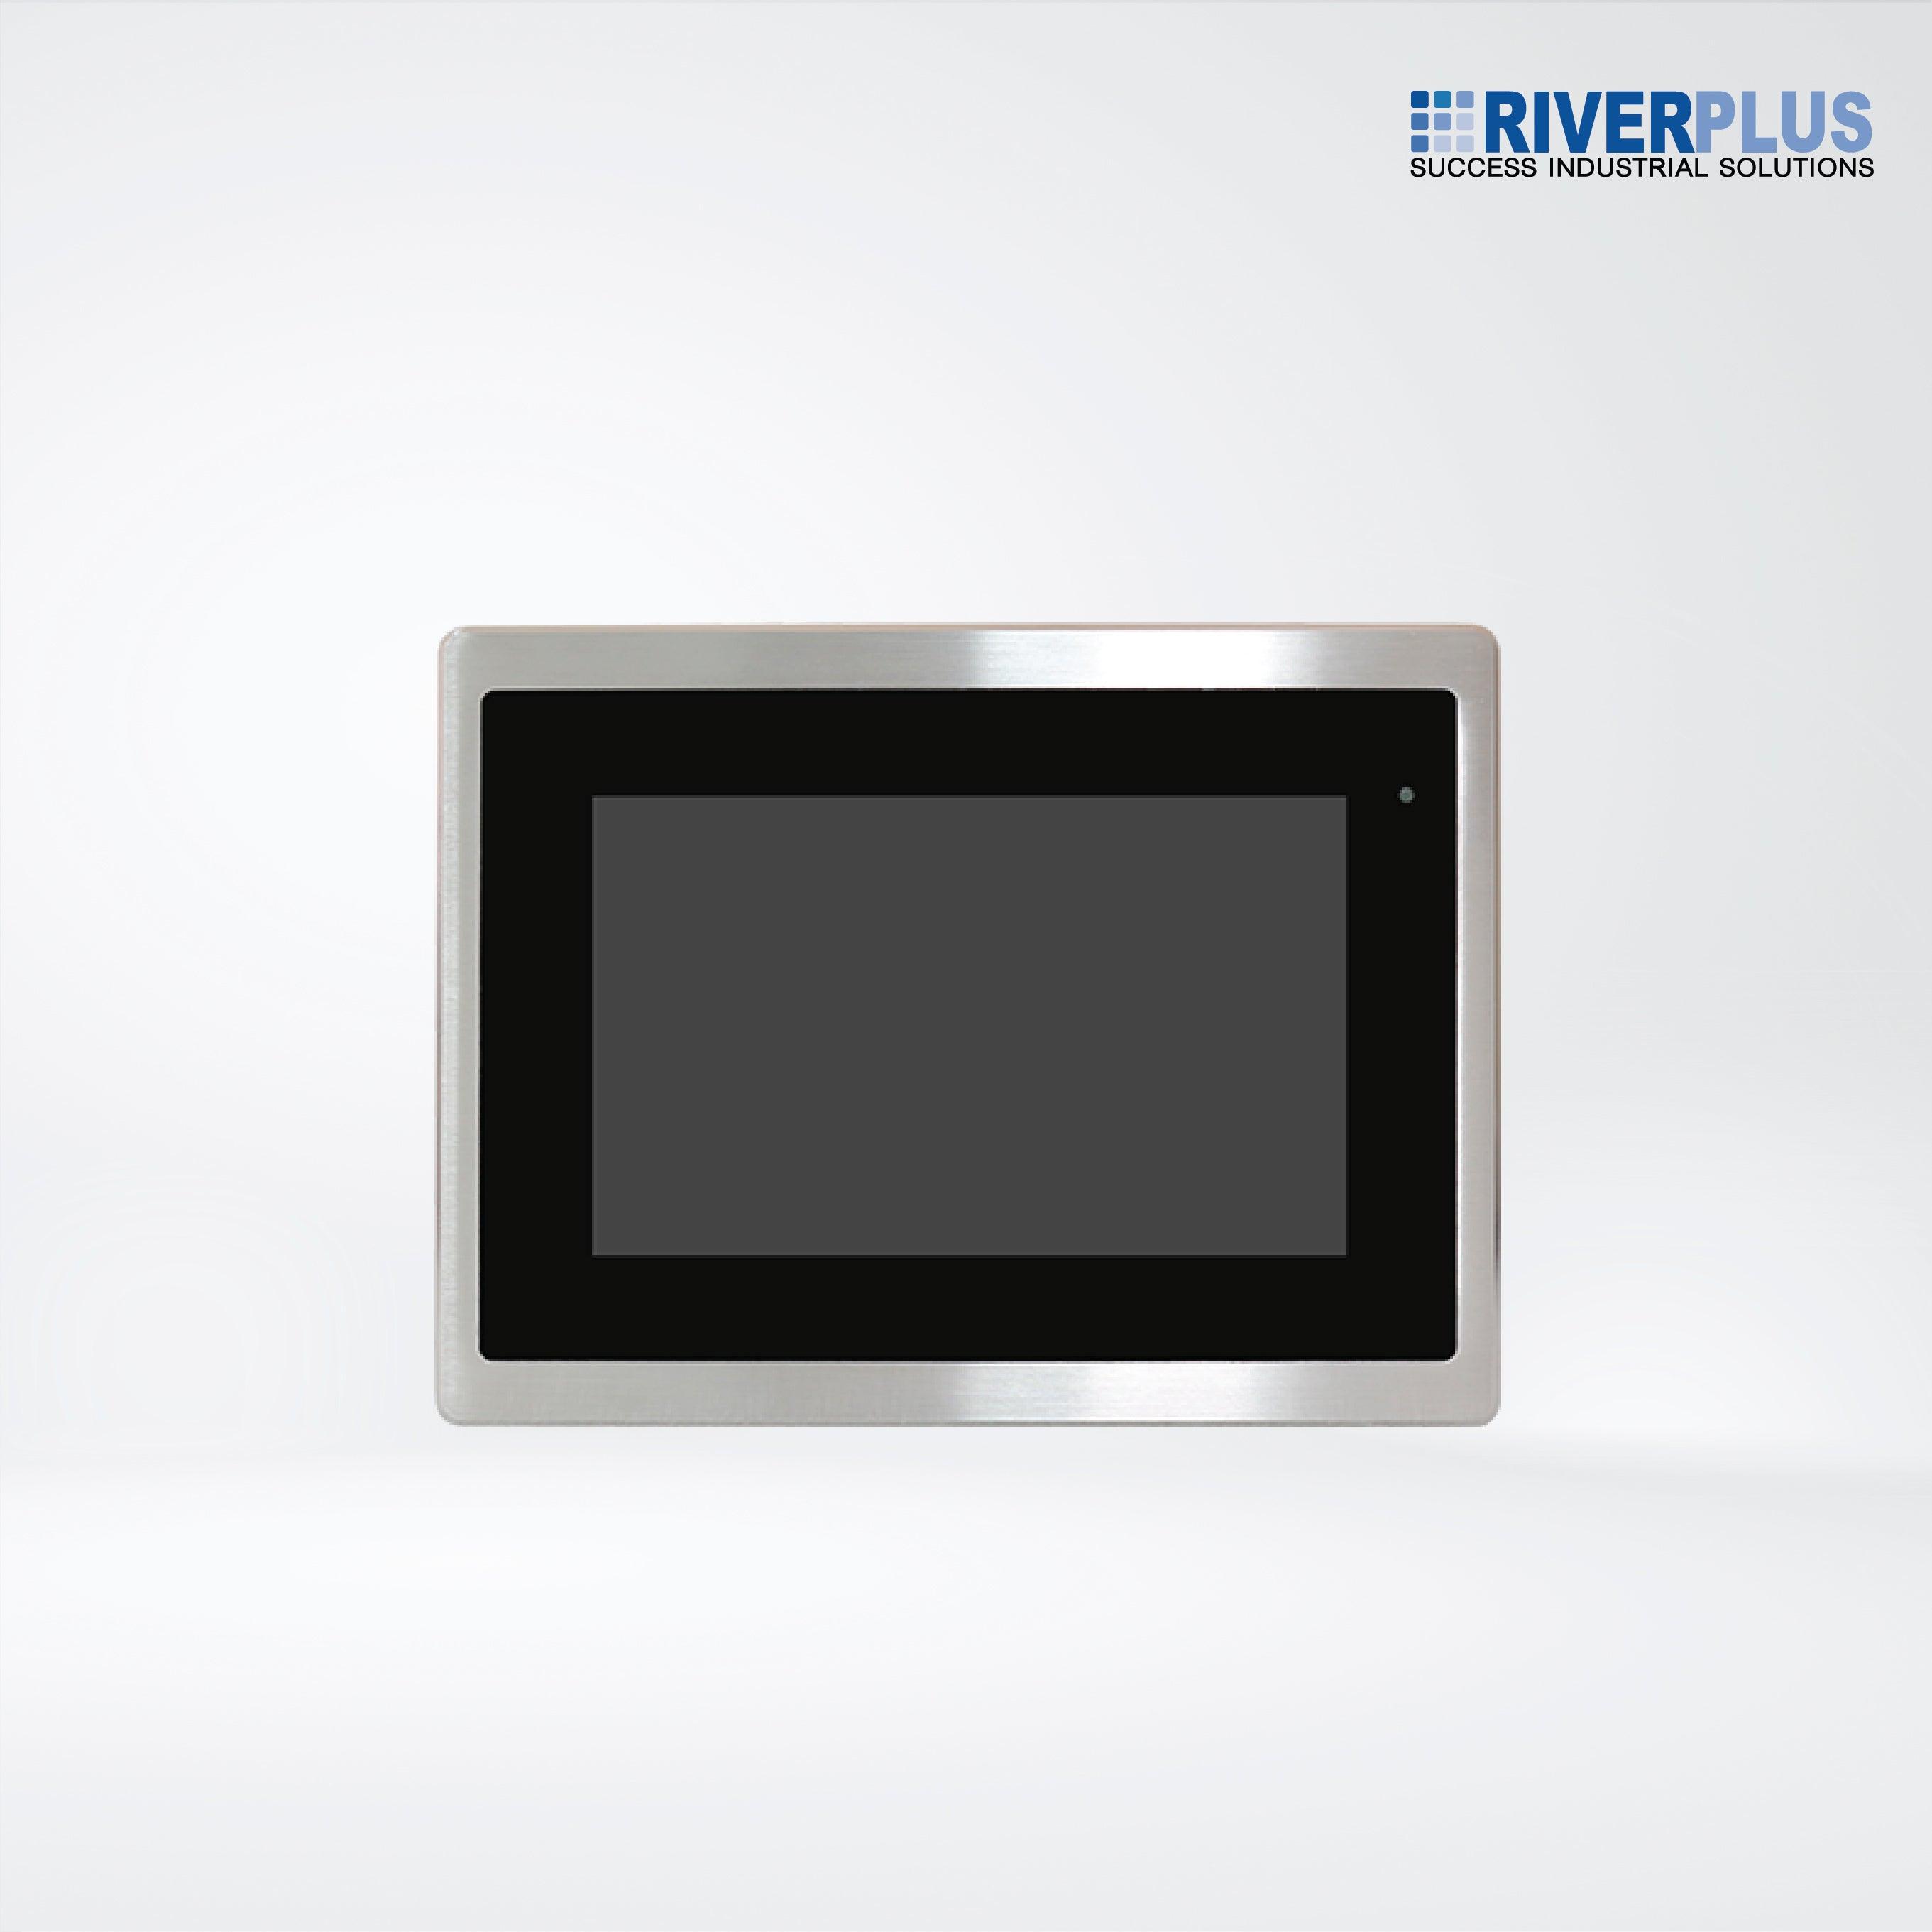 FABS-107G 7” Flat Front Panel IP66 Stainless Chassis Display - Riverplus